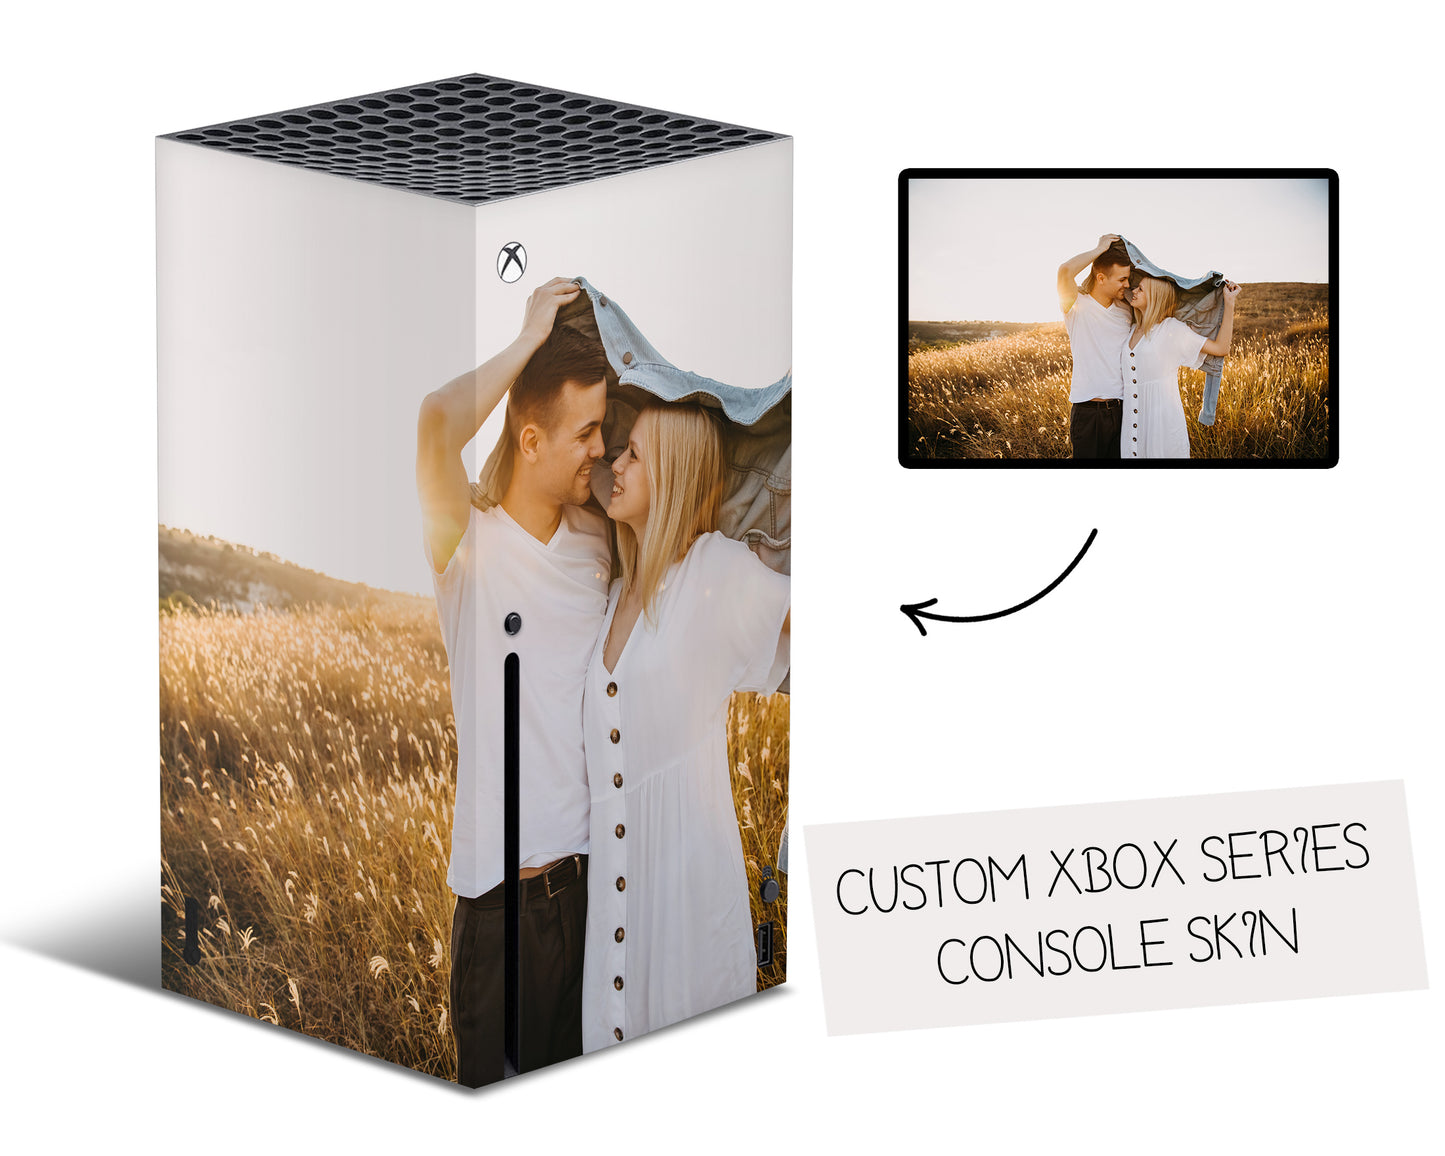 Create Your Own Xbox Series X & S Console Skin